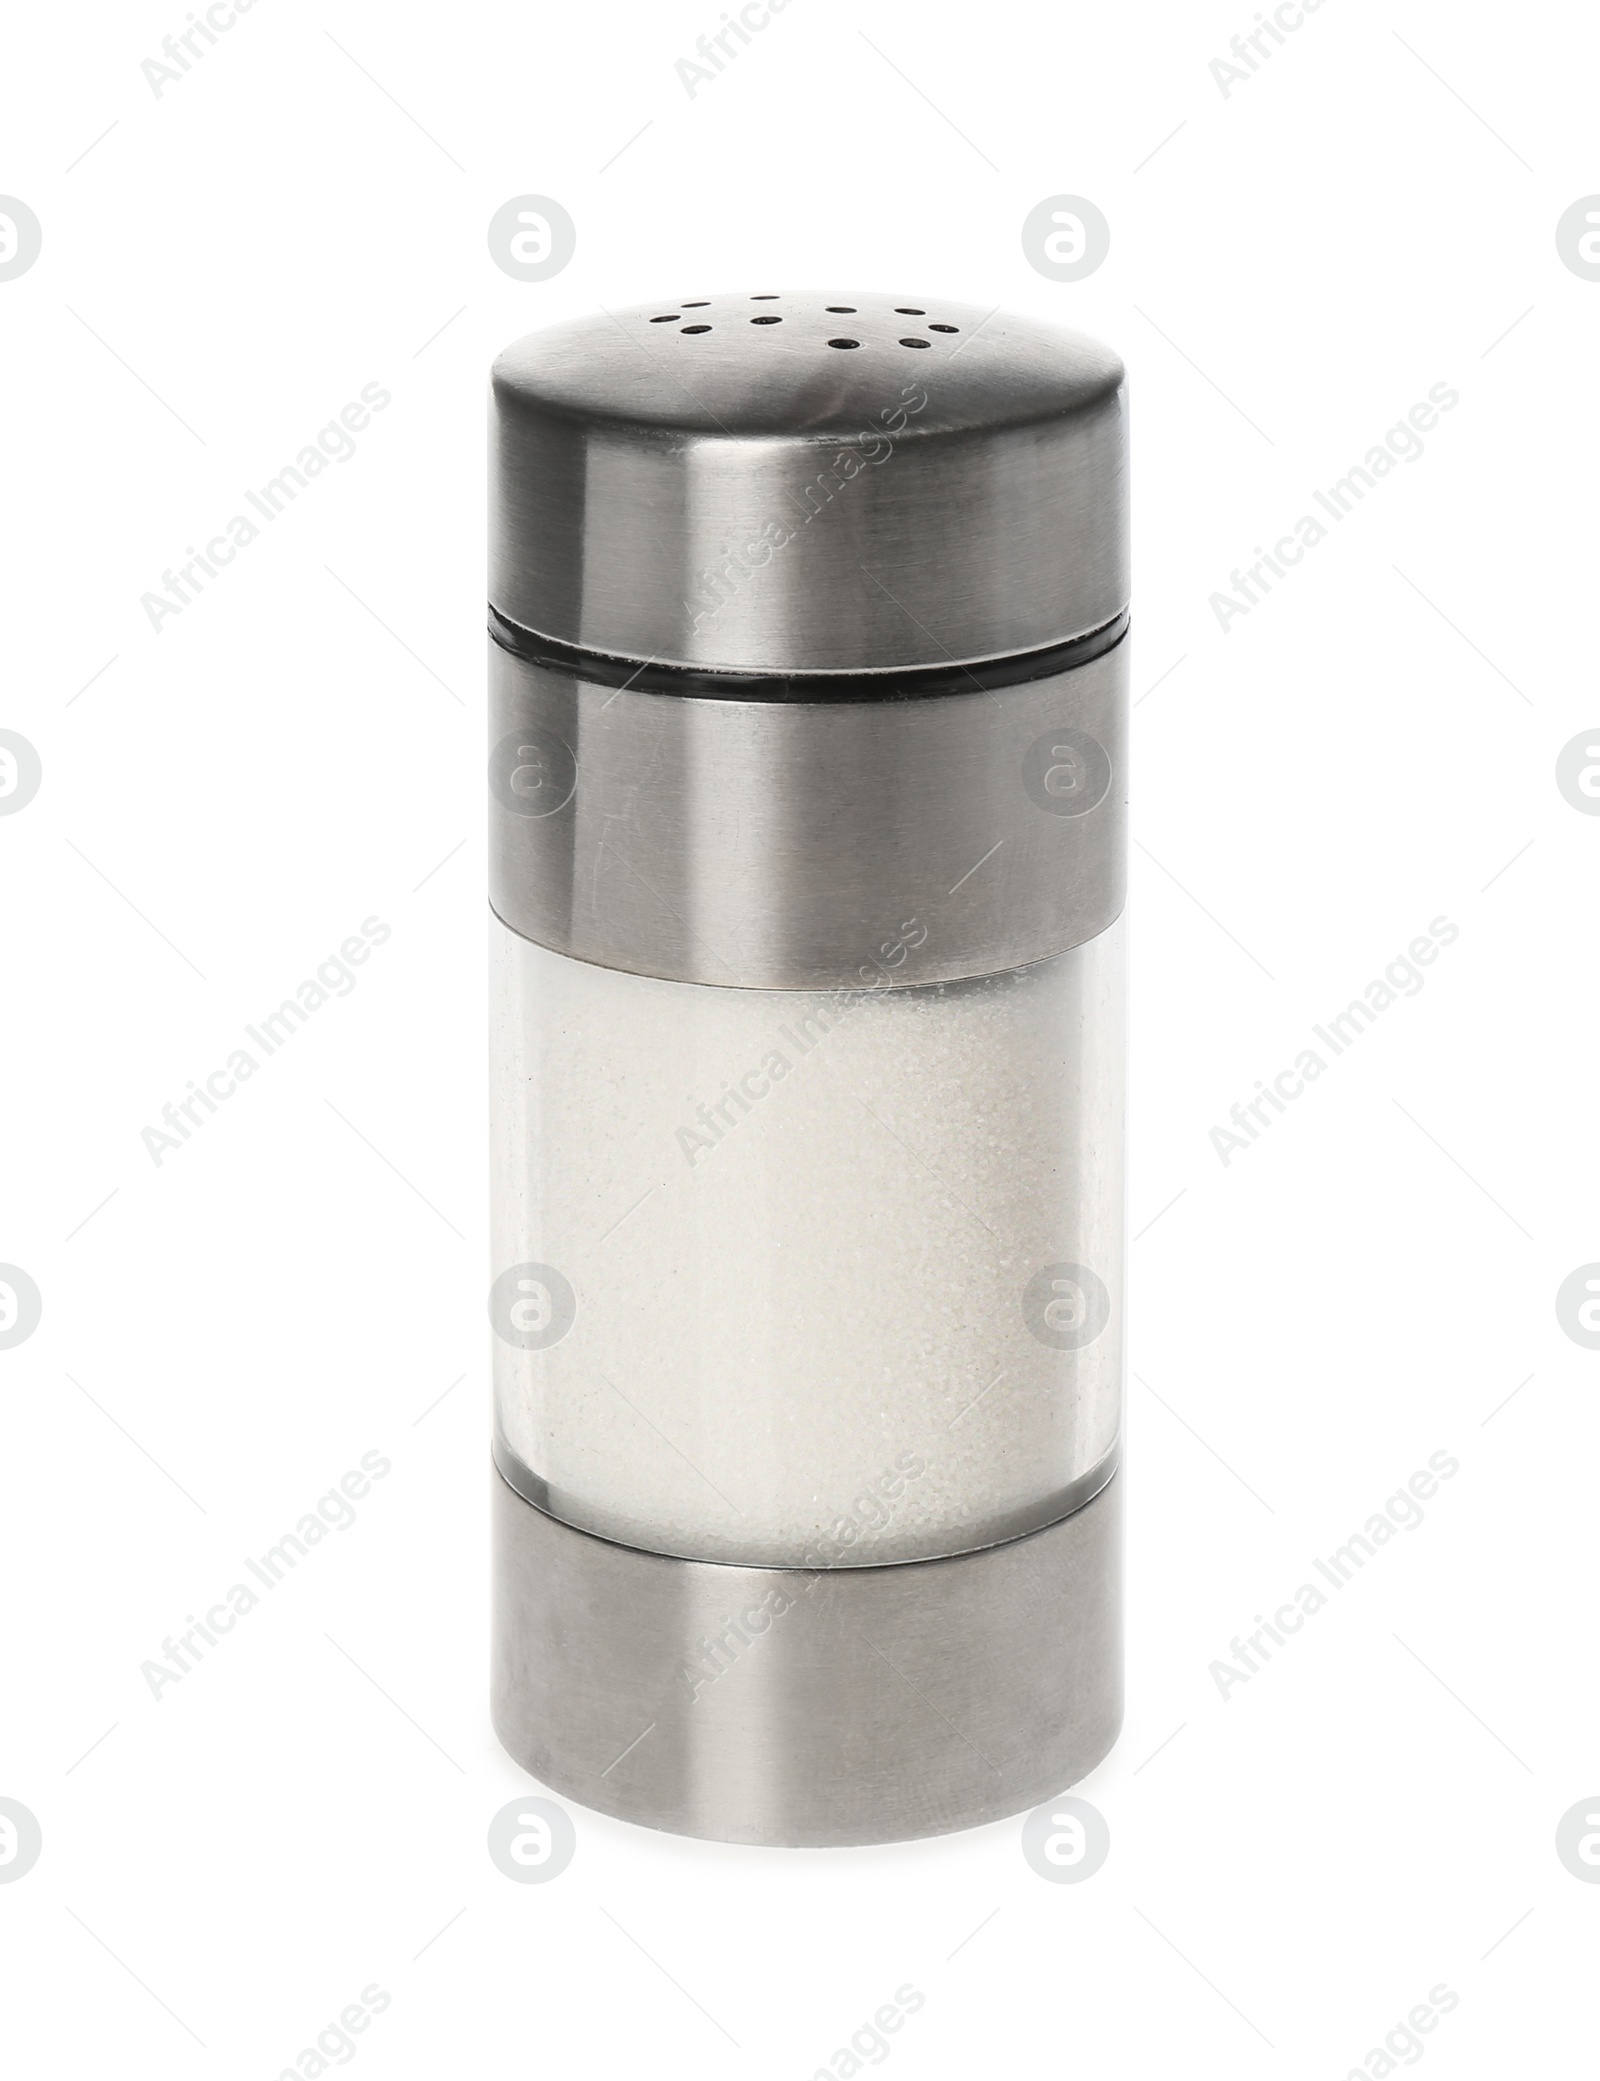 Photo of Shaker with natural salt isolated on white